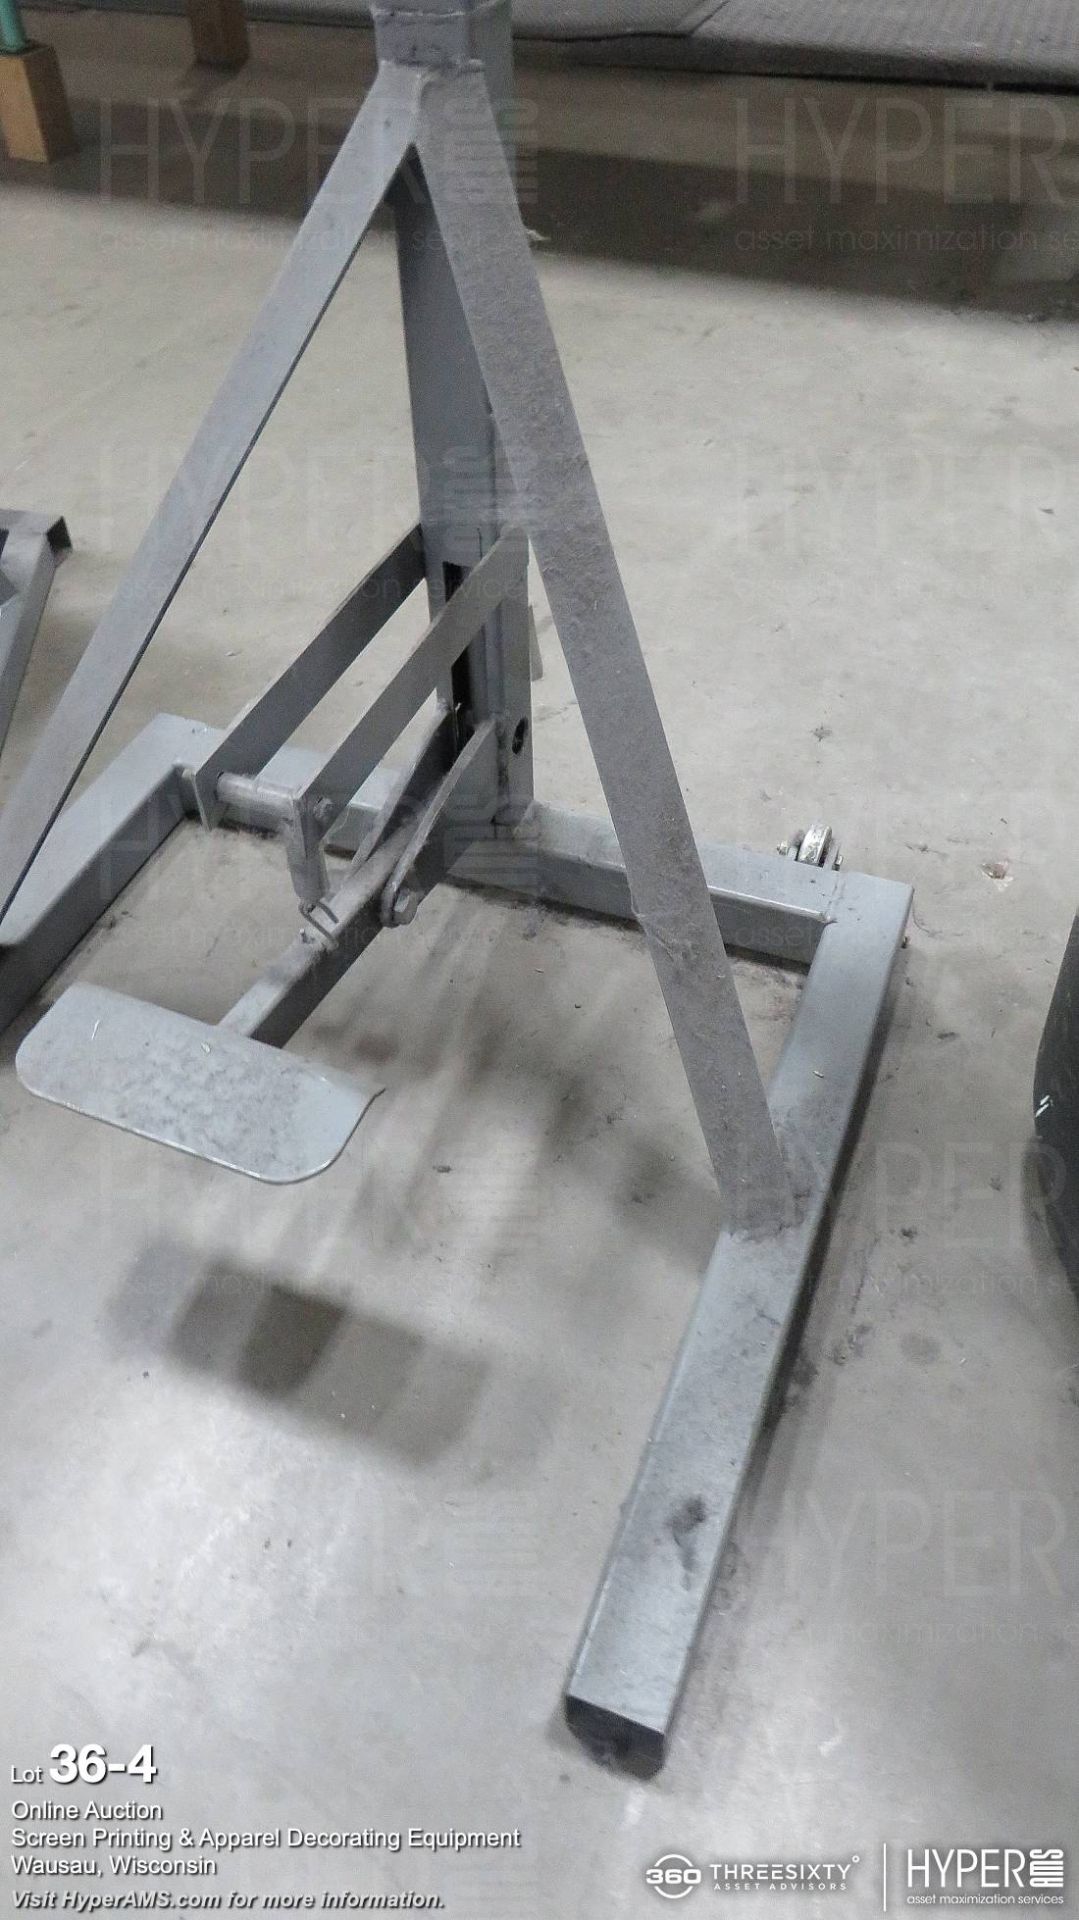 Foot actuated press - Image 4 of 4